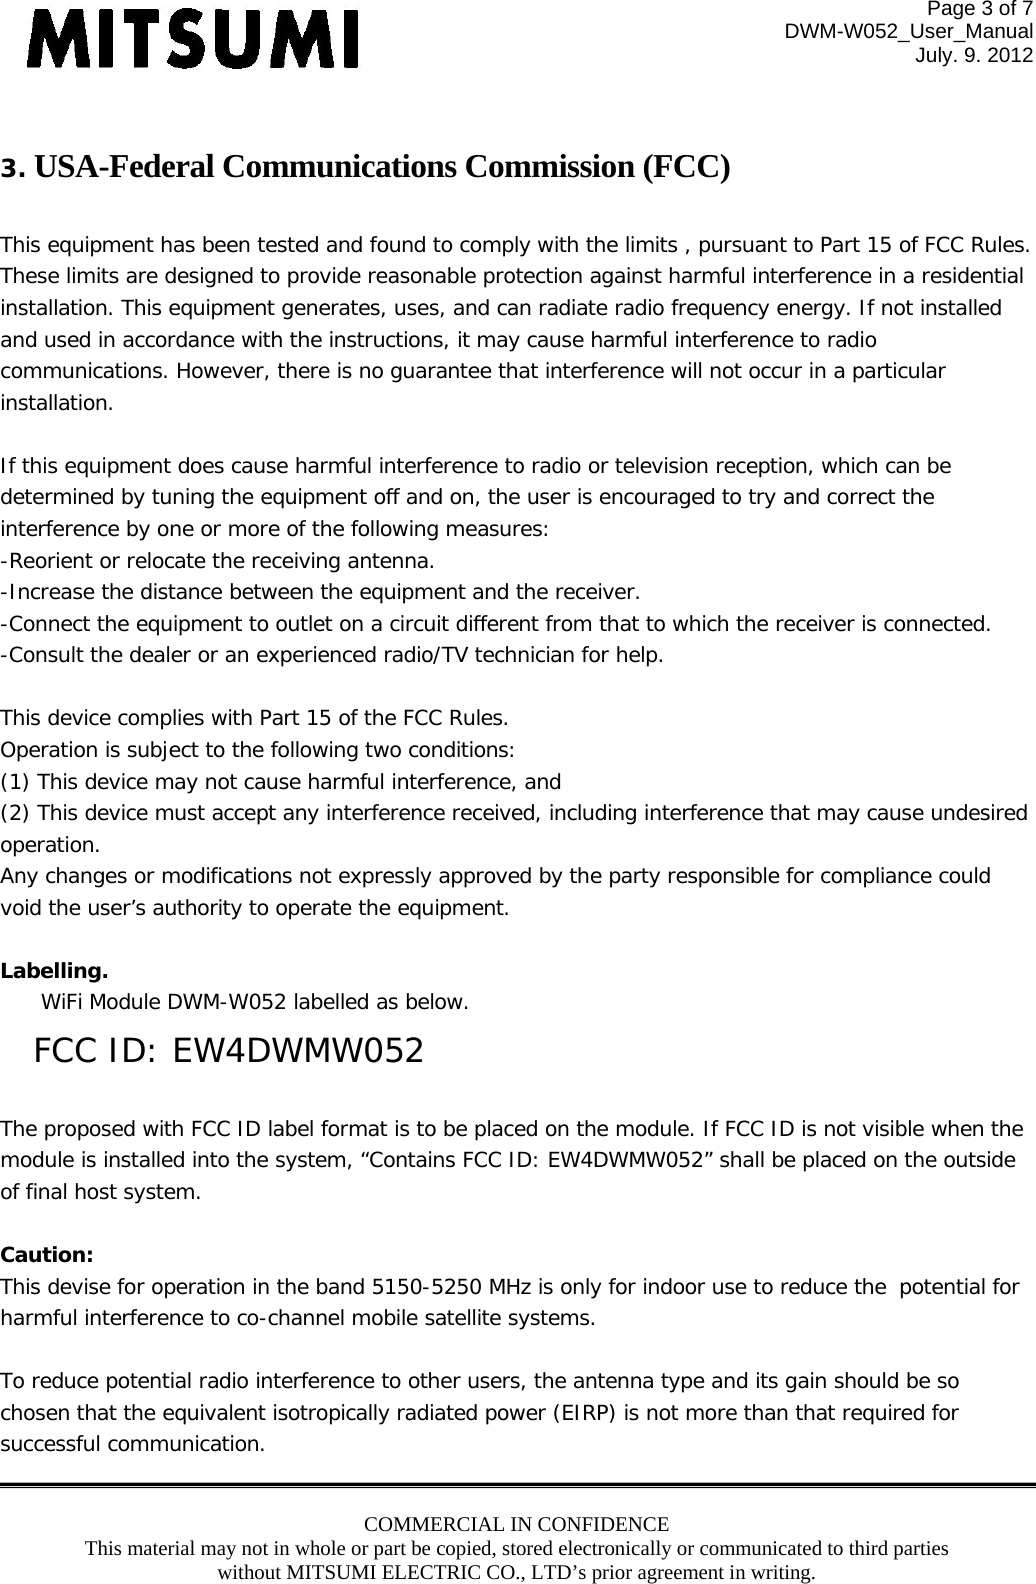 Page 3 of 7 DWM-W052_User_Manual July. 9. 2012 COMMERCIAL IN CONFIDENCE This material may not in whole or part be copied, stored electronically or communicated to third parties without MITSUMI ELECTRIC CO., LTD’s prior agreement in writing.   3. USA-Federal Communications Commission (FCC)   This equipment has been tested and found to comply with the limits , pursuant to Part 15 of FCC Rules. These limits are designed to provide reasonable protection against harmful interference in a residential installation. This equipment generates, uses, and can radiate radio frequency energy. If not installed and used in accordance with the instructions, it may cause harmful interference to radio communications. However, there is no guarantee that interference will not occur in a particular installation.  If this equipment does cause harmful interference to radio or television reception, which can be determined by tuning the equipment off and on, the user is encouraged to try and correct the interference by one or more of the following measures: -Reorient or relocate the receiving antenna. -Increase the distance between the equipment and the receiver. -Connect the equipment to outlet on a circuit different from that to which the receiver is connected. -Consult the dealer or an experienced radio/TV technician for help.  This device complies with Part 15 of the FCC Rules. Operation is subject to the following two conditions: (1) This device may not cause harmful interference, and (2) This device must accept any interference received, including interference that may cause undesired operation. Any changes or modifications not expressly approved by the party responsible for compliance could void the user’s authority to operate the equipment.  Labelling.  WiFi Module DWM-W052 labelled as below. FCC ID: EW4DWMW052  The proposed with FCC ID label format is to be placed on the module. If FCC ID is not visible when the module is installed into the system, “Contains FCC ID: EW4DWMW052” shall be placed on the outside of final host system.   Caution:  This devise for operation in the band 5150-5250 MHz is only for indoor use to reduce the potential for harmful interference to co-channel mobile satellite systems.  To reduce potential radio interference to other users, the antenna type and its gain should be so chosen that the equivalent isotropically radiated power (EIRP) is not more than that required for successful communication. 